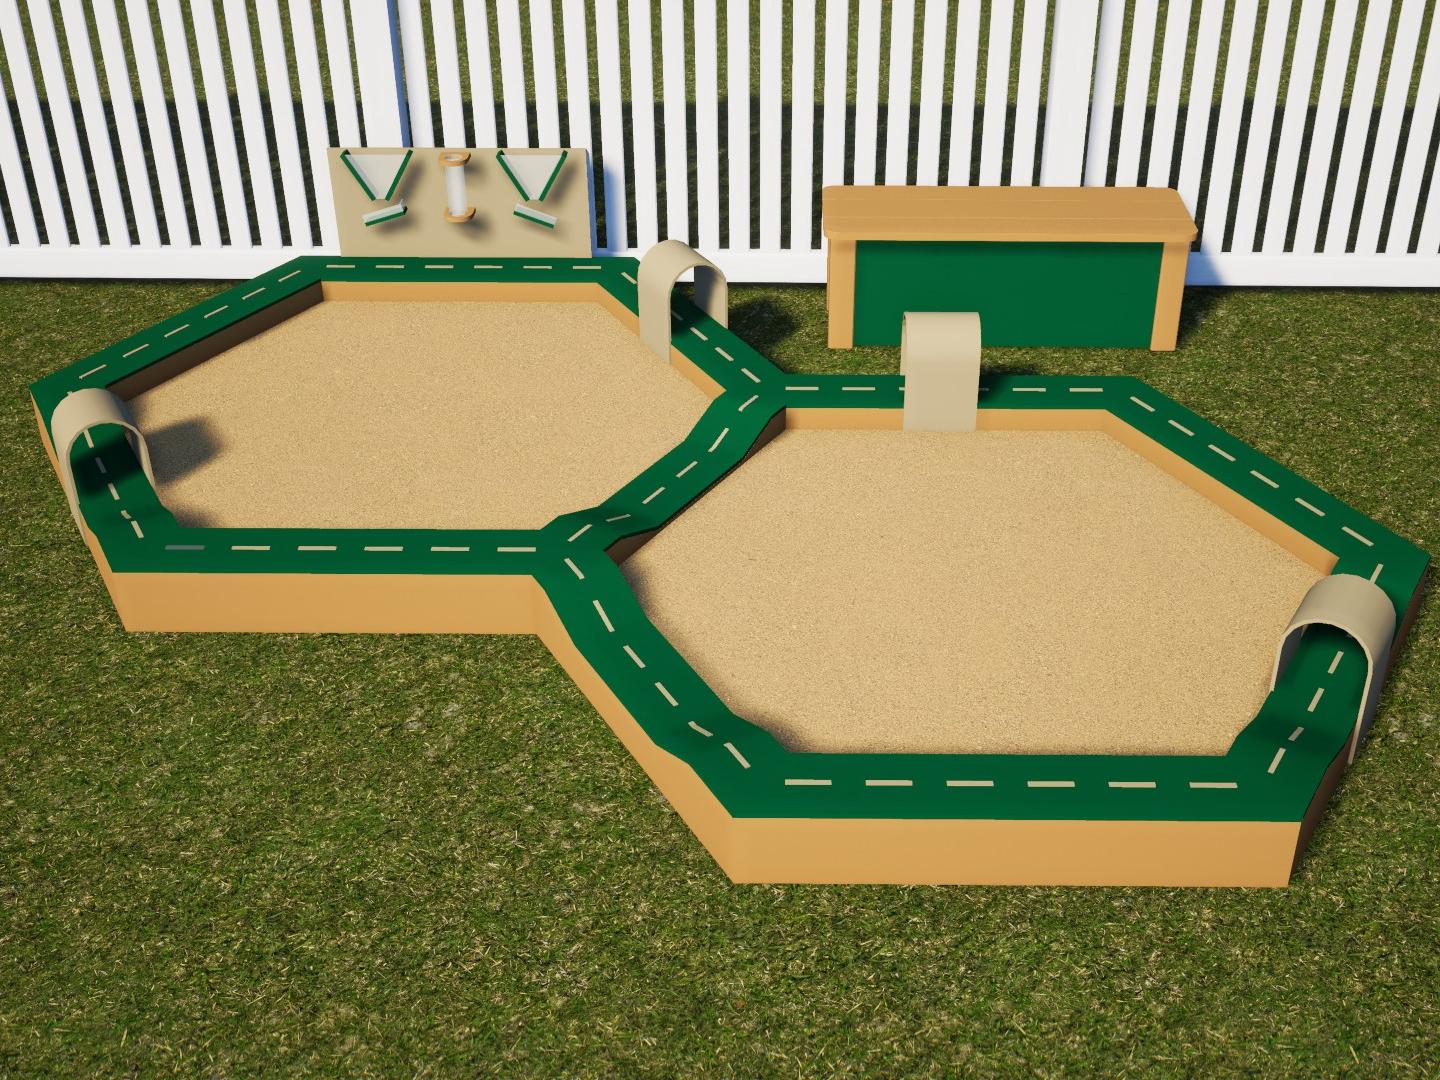 Race around this sandbox and fill-up the dump trucks at the sand wall. This outdoor playground sandbox makes sand play more exciting!